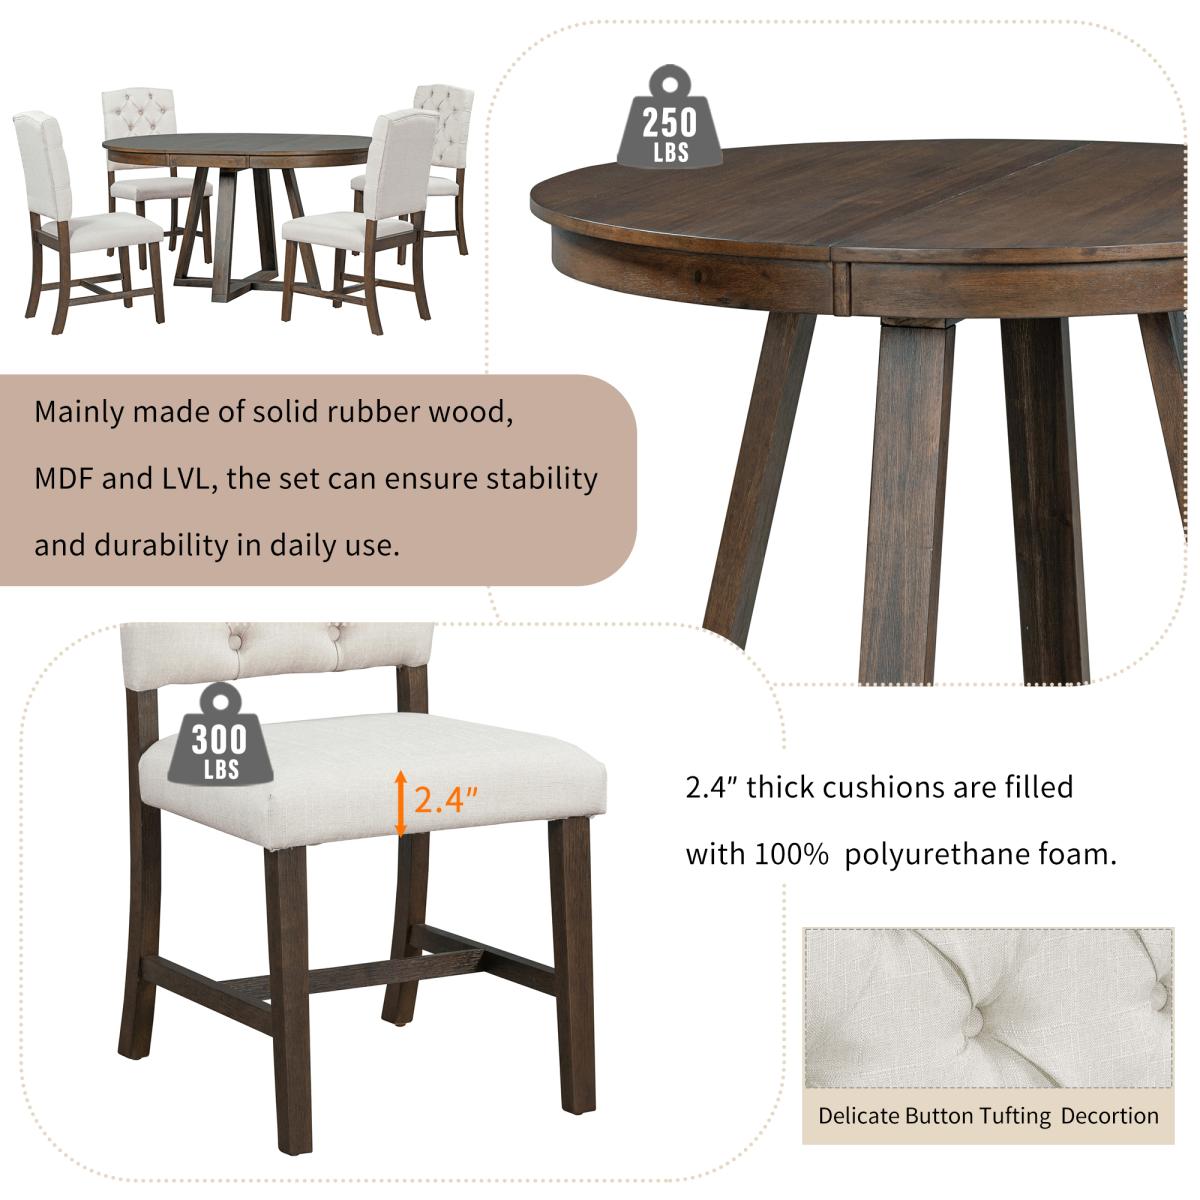 TREXM 5-Piece Retro Functional Dining Set, Round Table with a 16